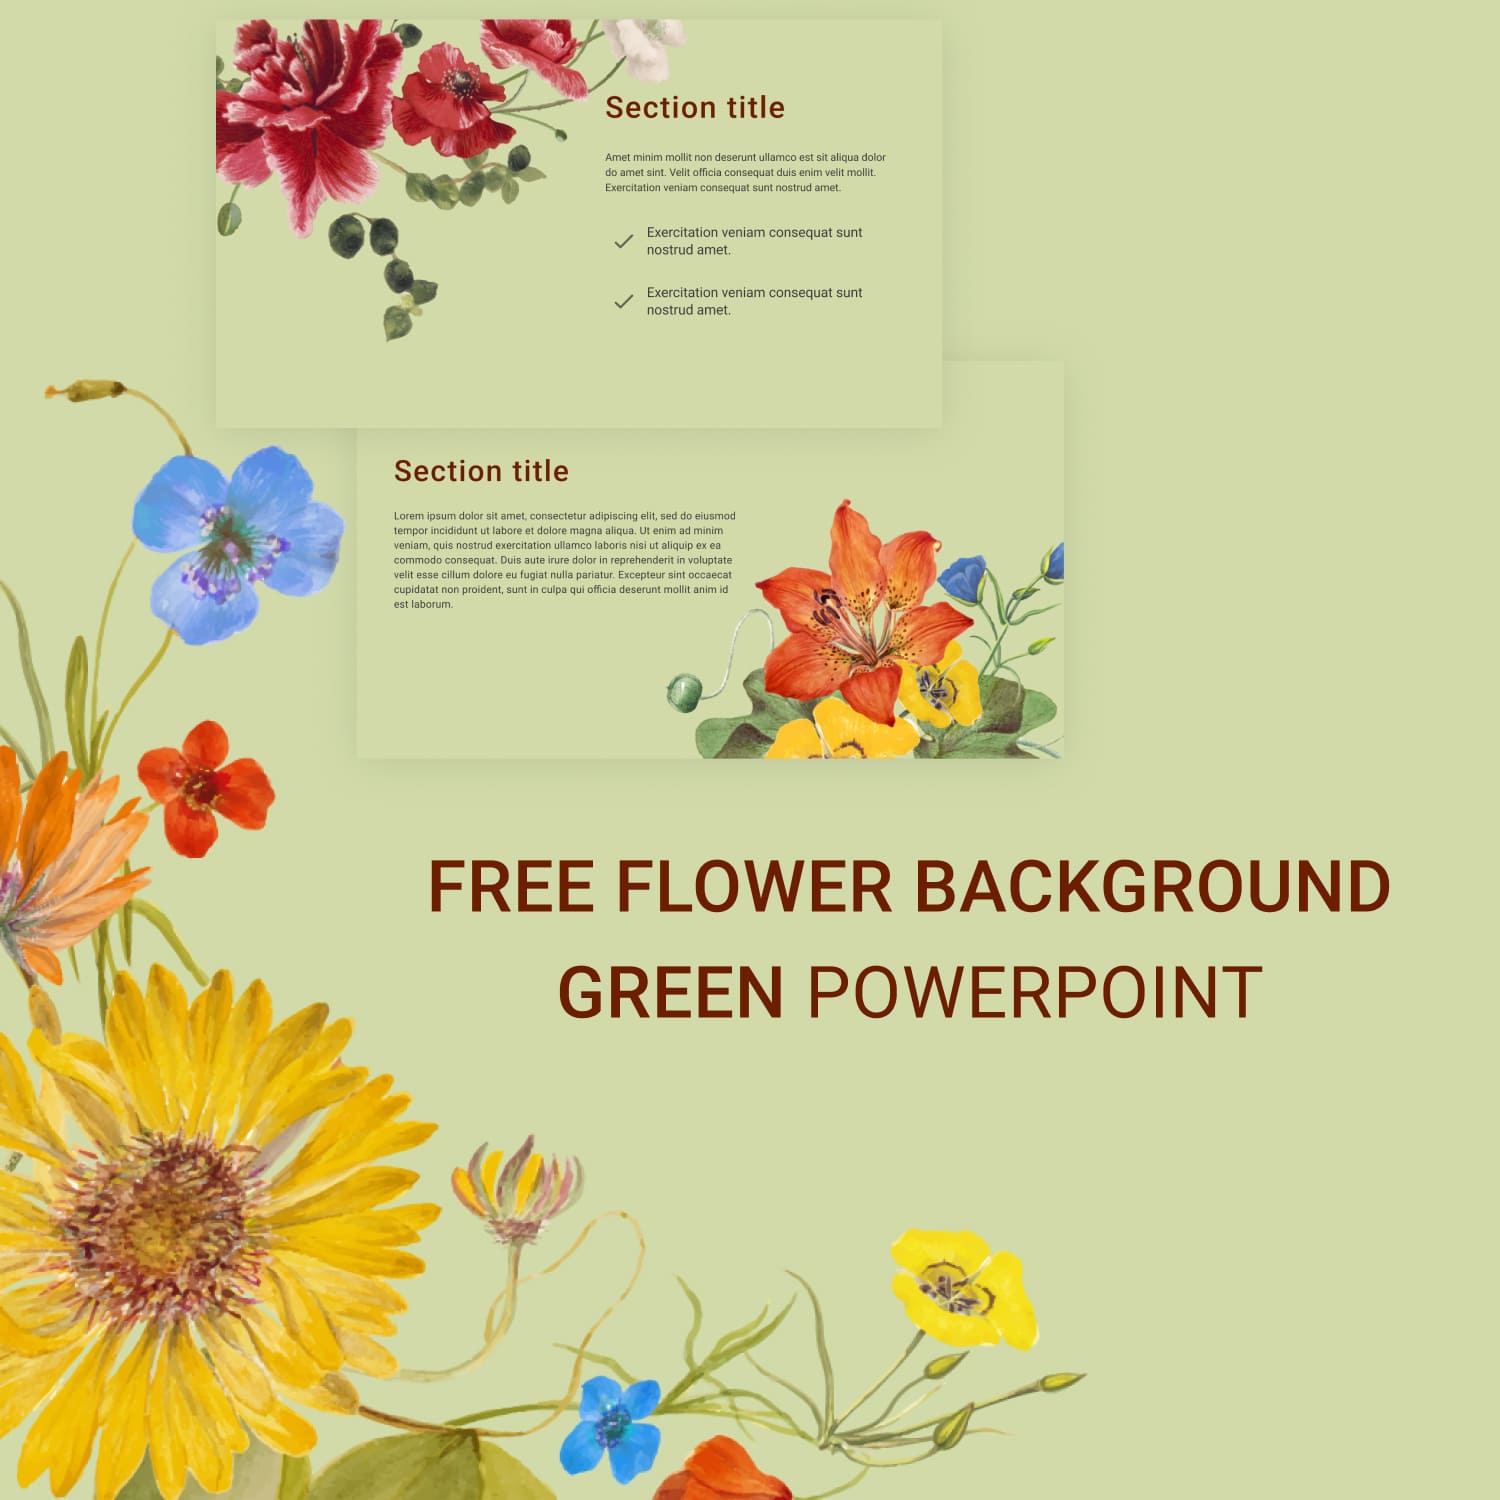 Preview Free Flower Background Green Powerpoint 1500 1.